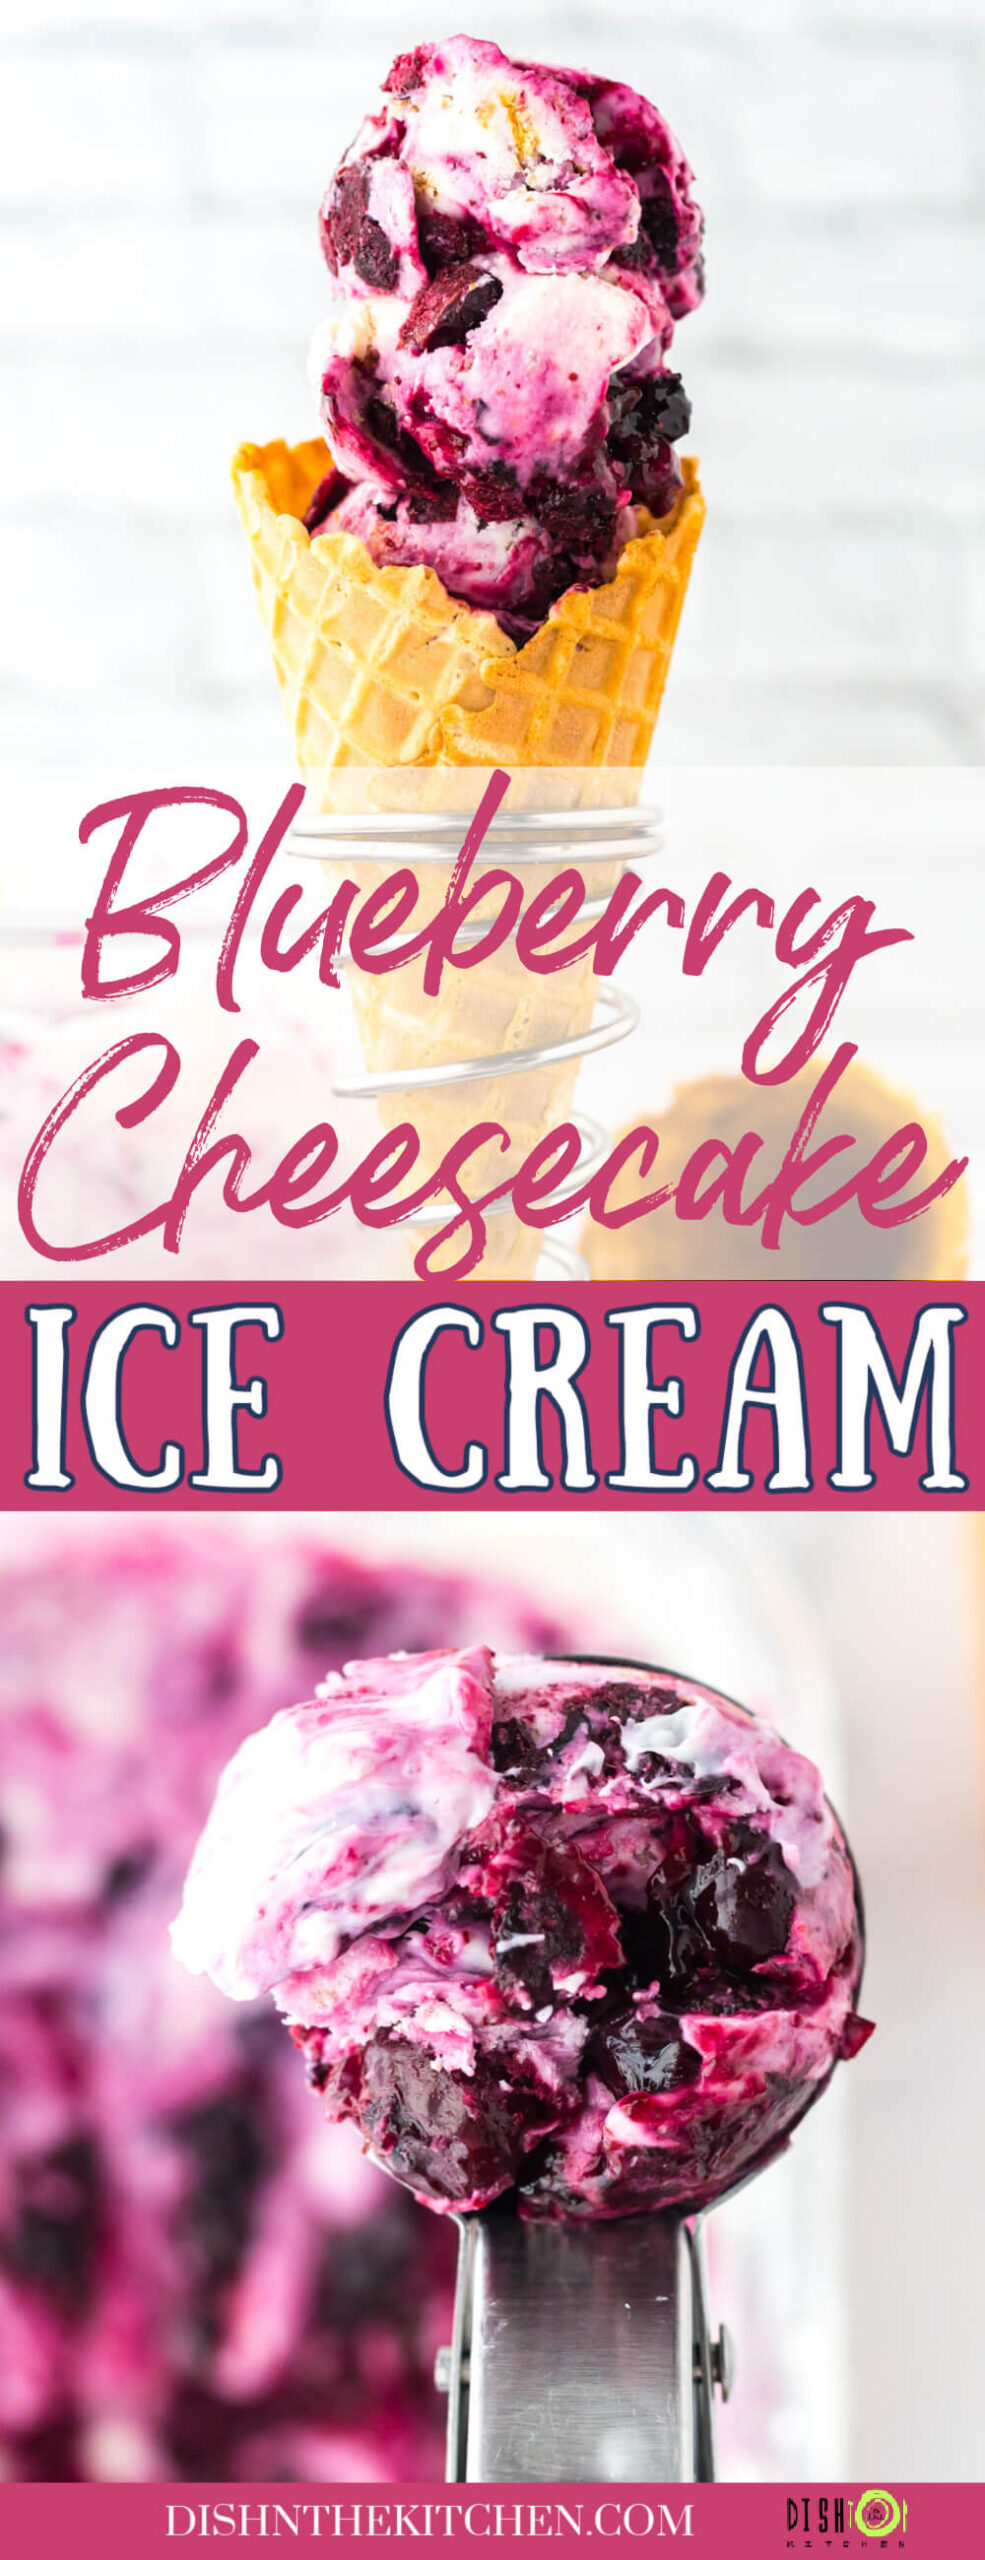 Pinterest image featuring scoops of Blueberry Cheesecake Ice Cream in a cone and in an ice cream scoop.